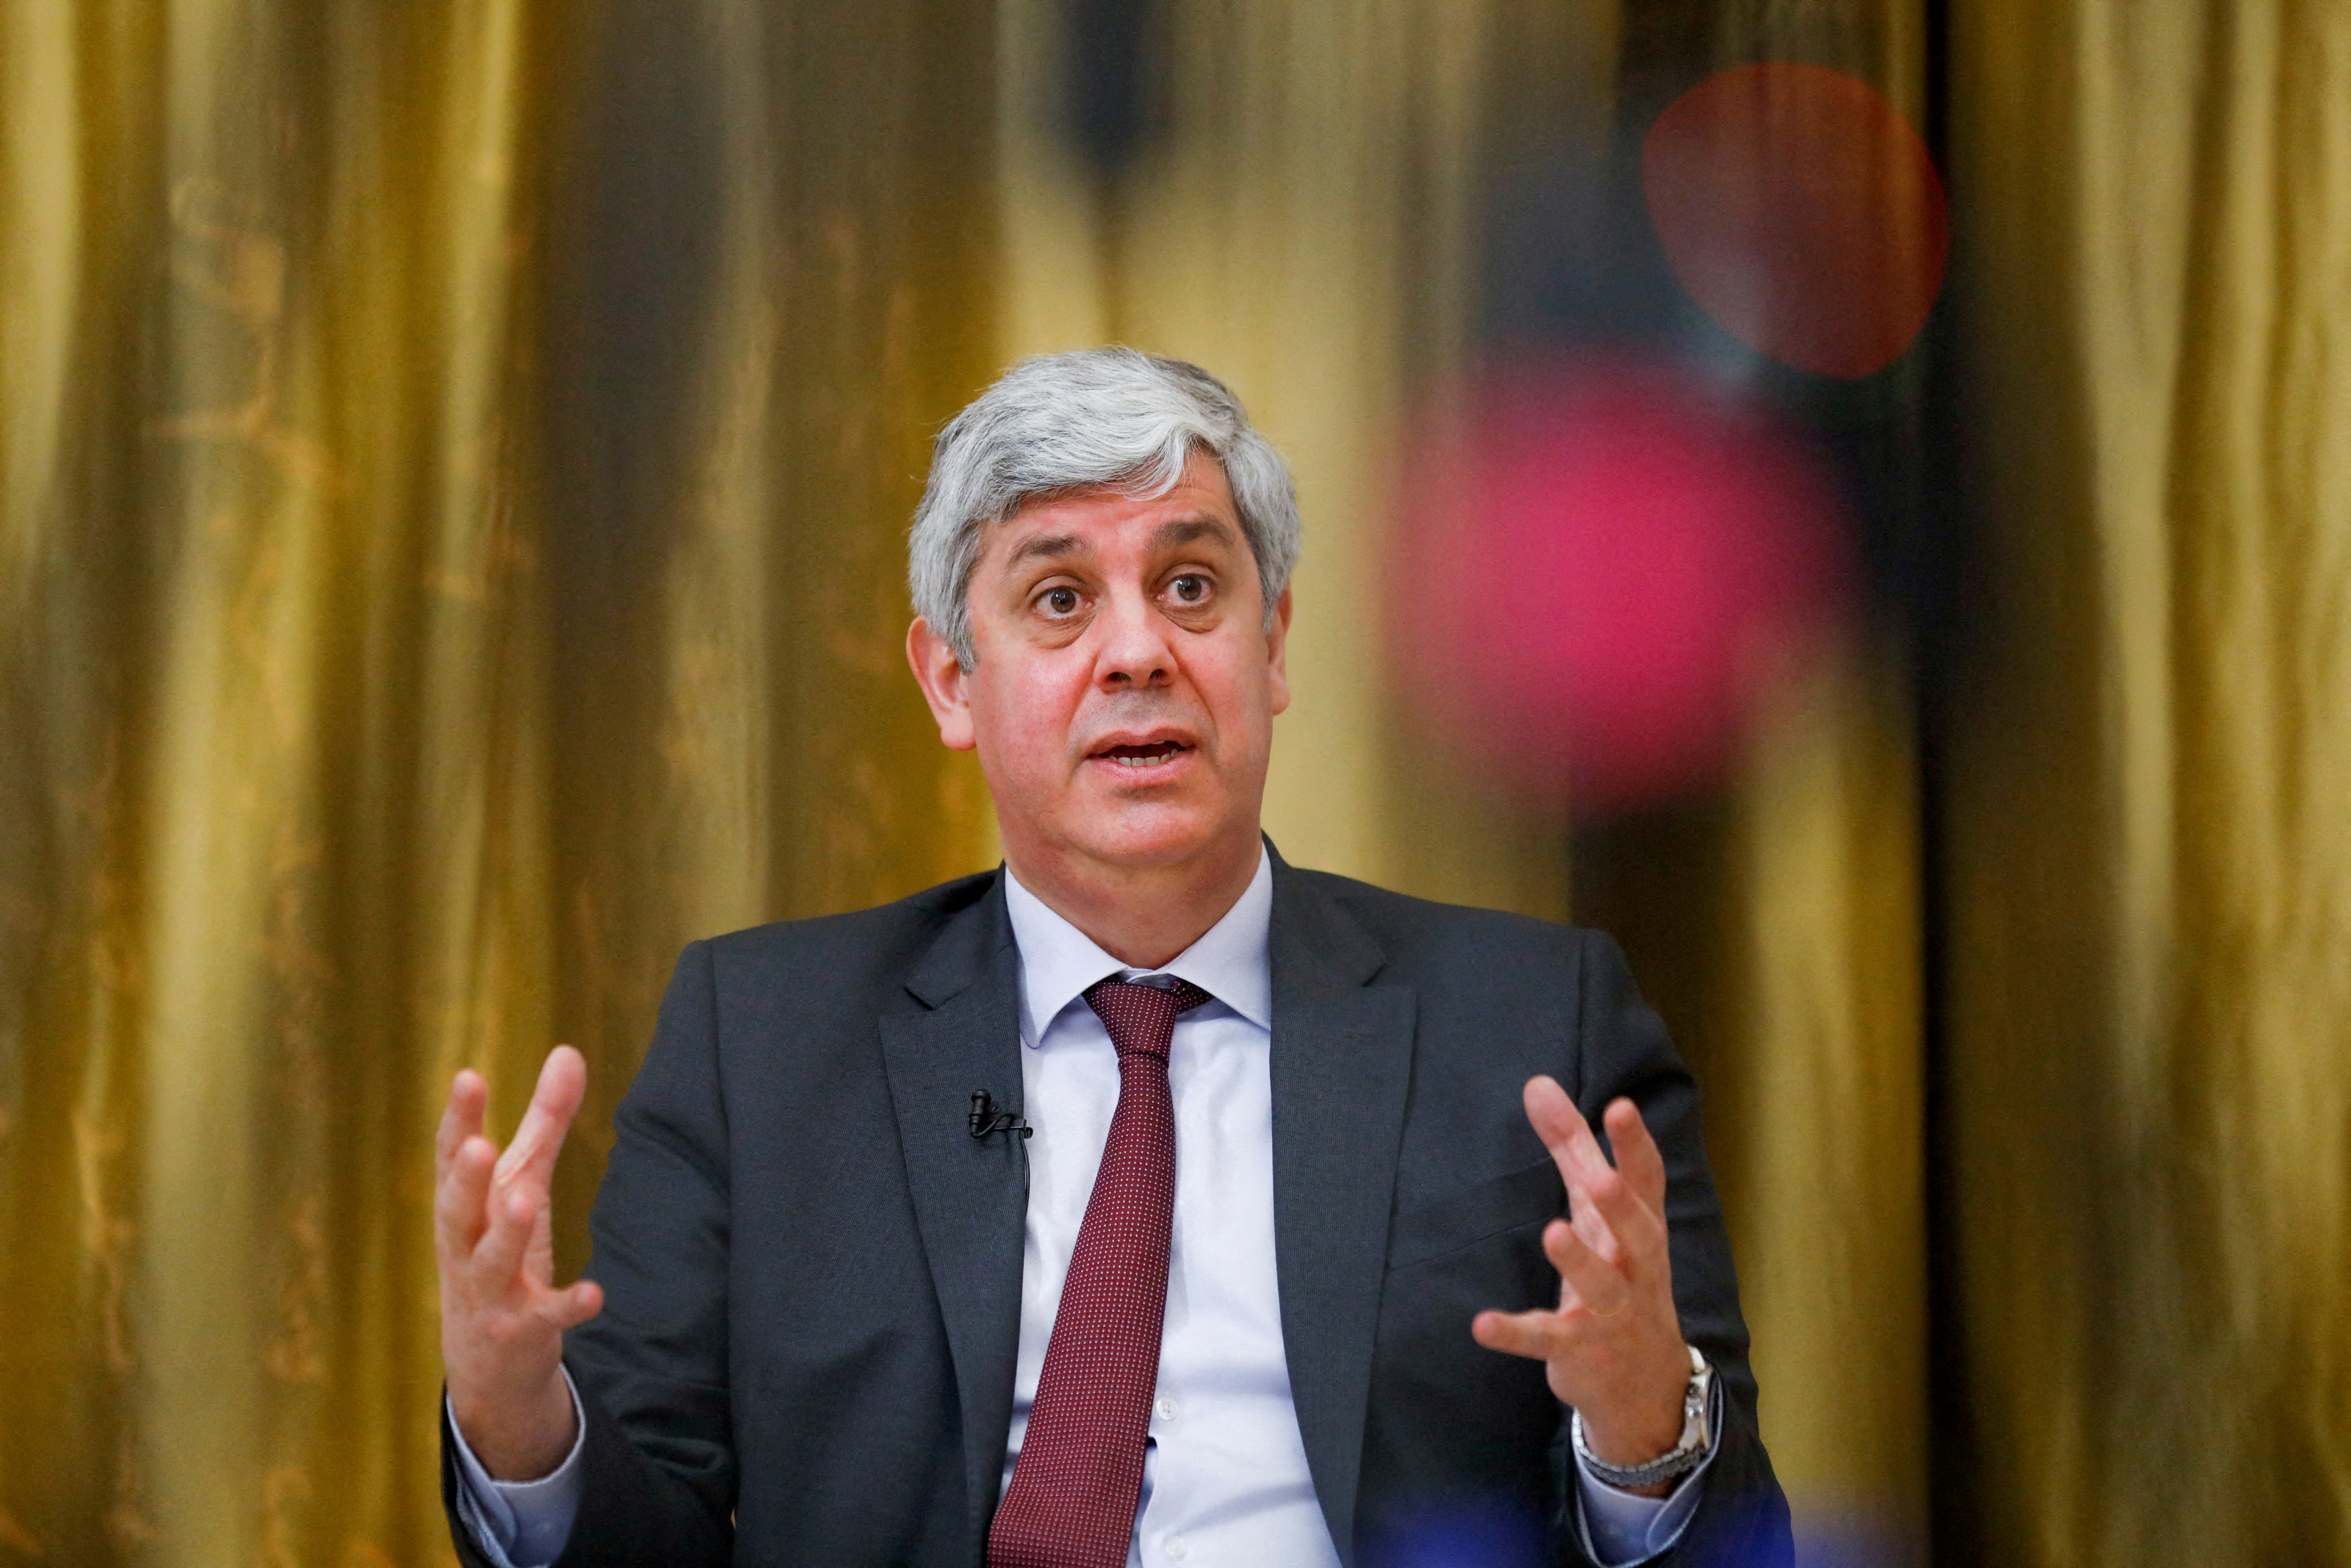 ECB governing council member Mario Centeno speaks during an interview with Reuters, in Lisbon